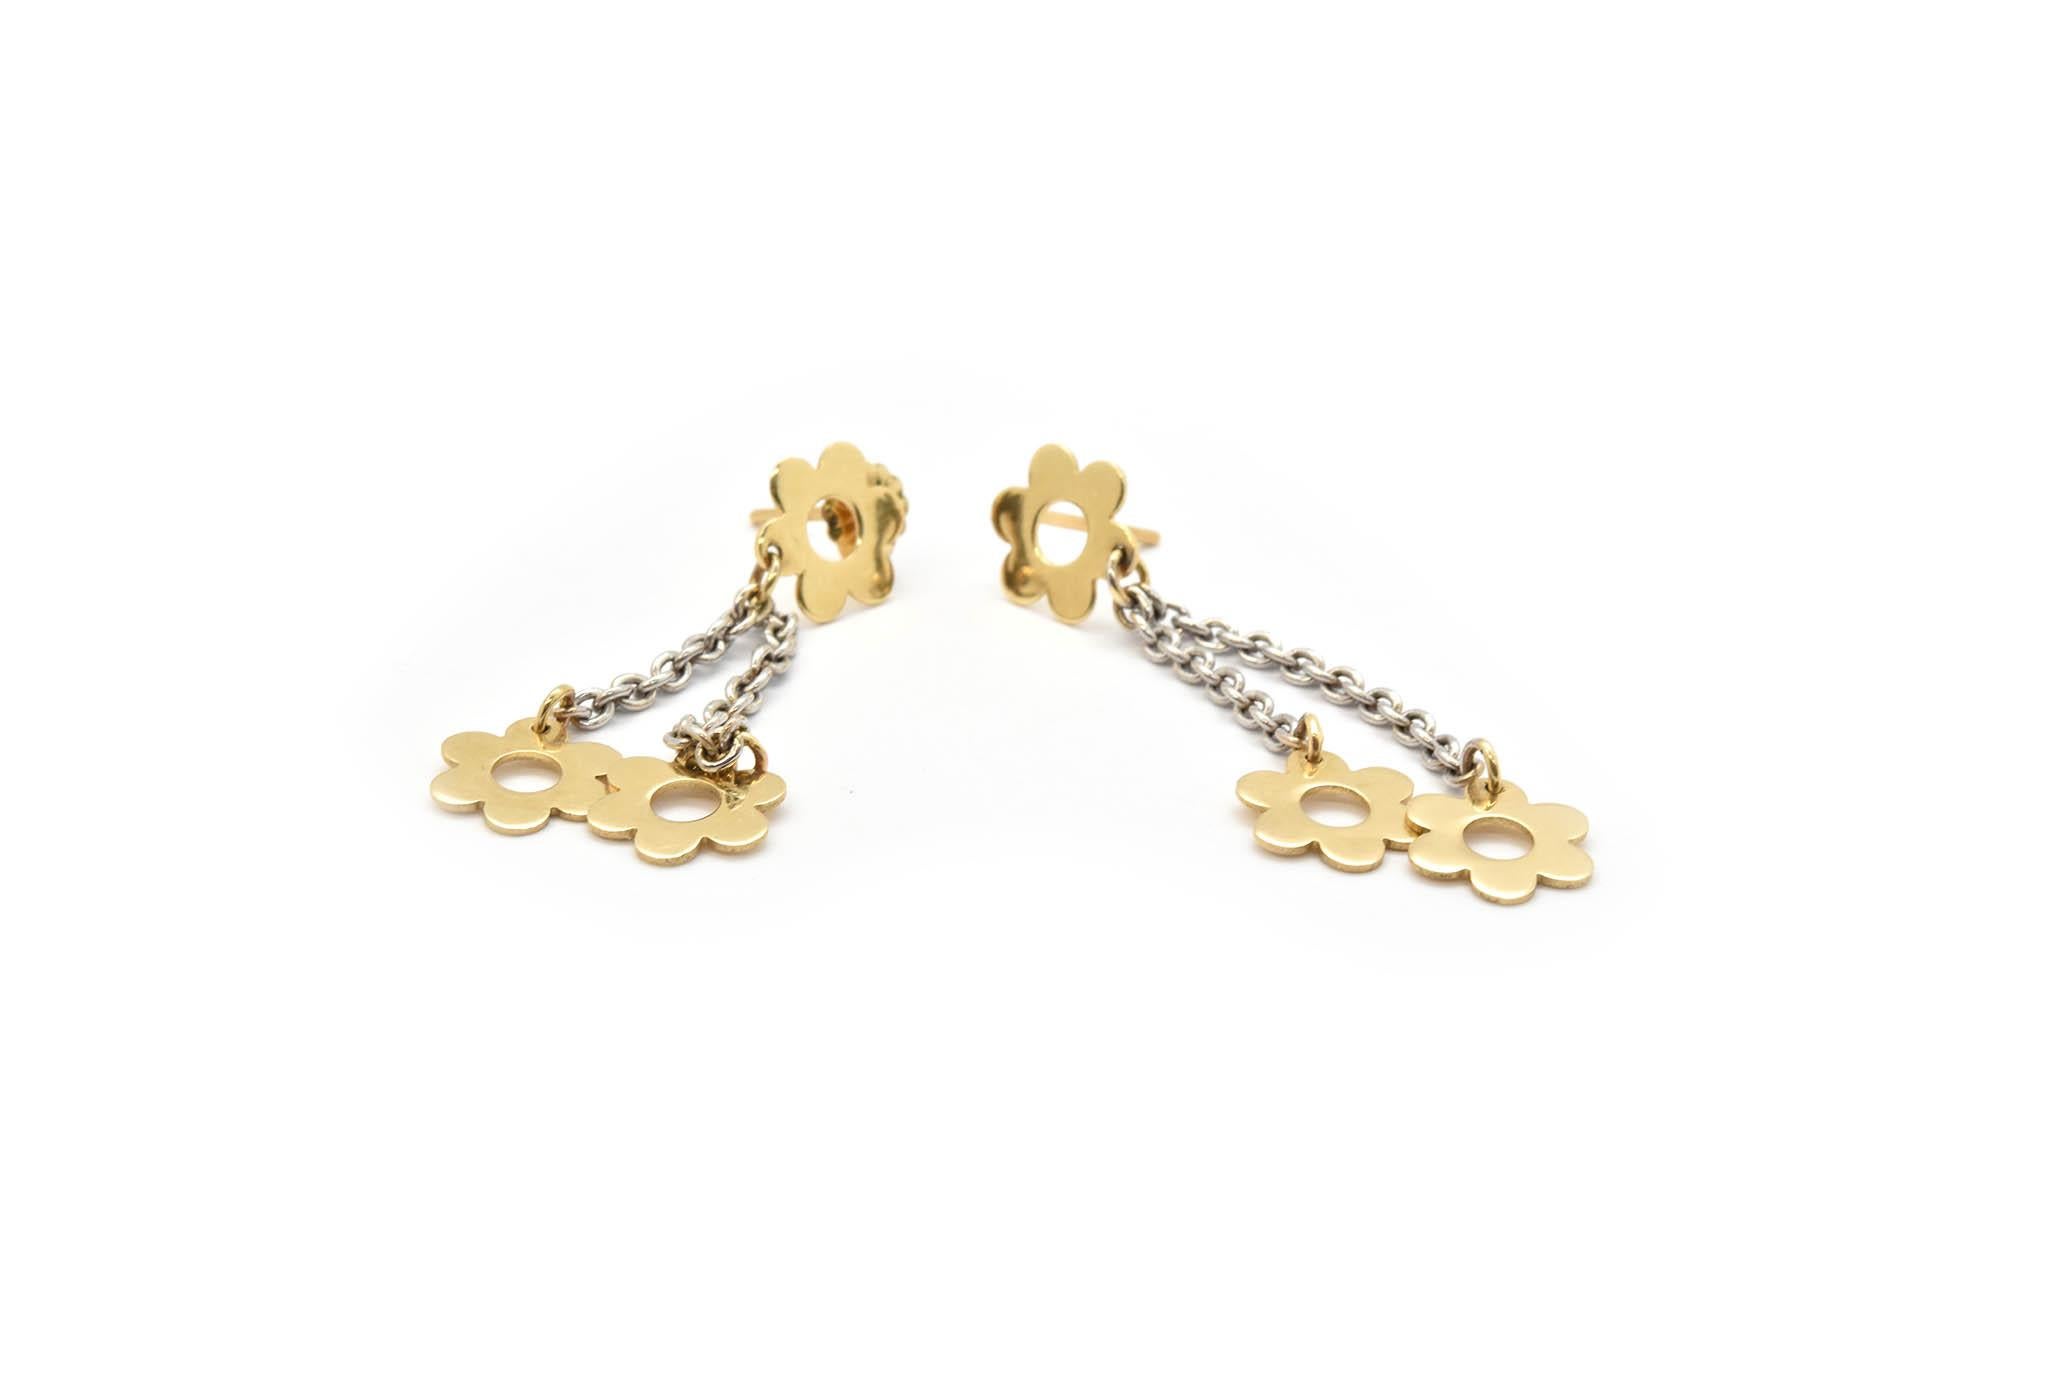 These sweet earrings are designed in 14k yellow gold, yellow gold flower accents are dangling from a chain to make these earrings complete. These earrings dangle about 1 and a half inch from the yellow gold accent that holds the post. These earrings